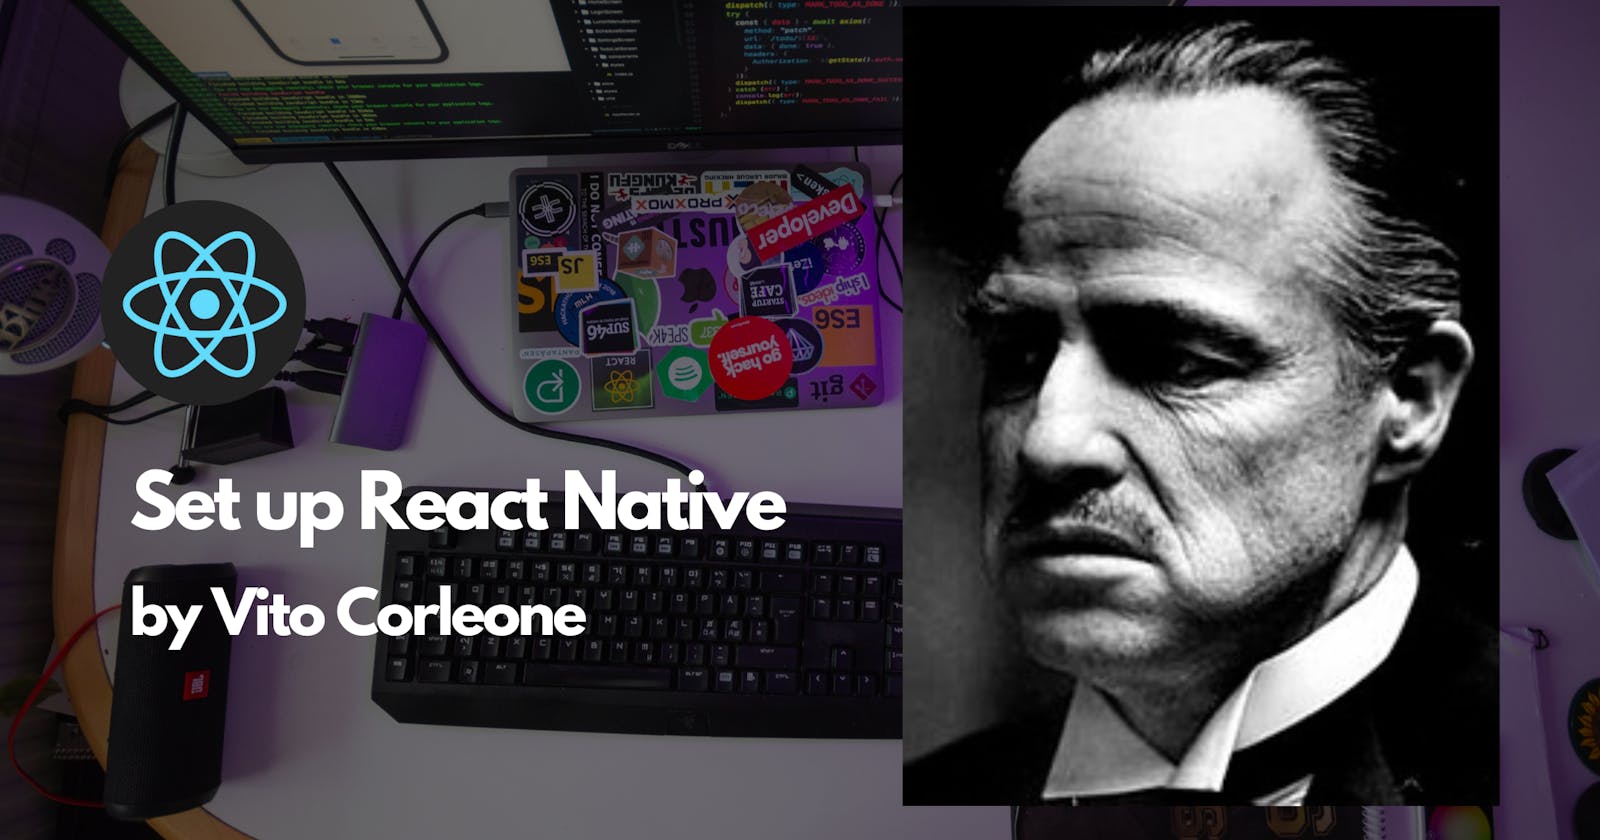 Set up React Native on Windows: A guide by the God Father.